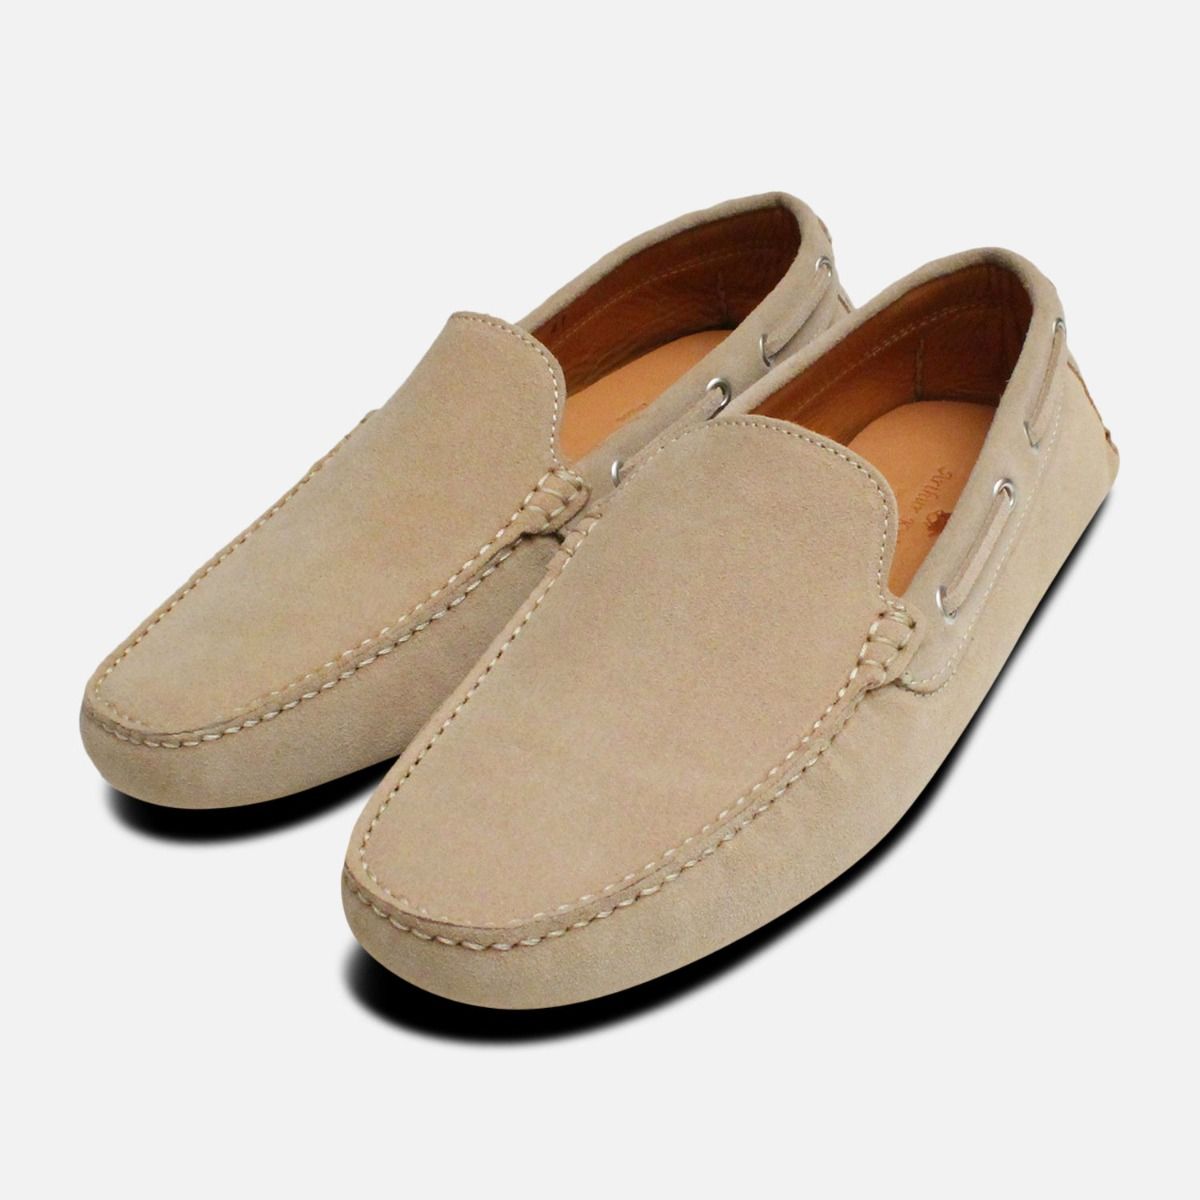 Beige Suede Italian Driving Shoes by 